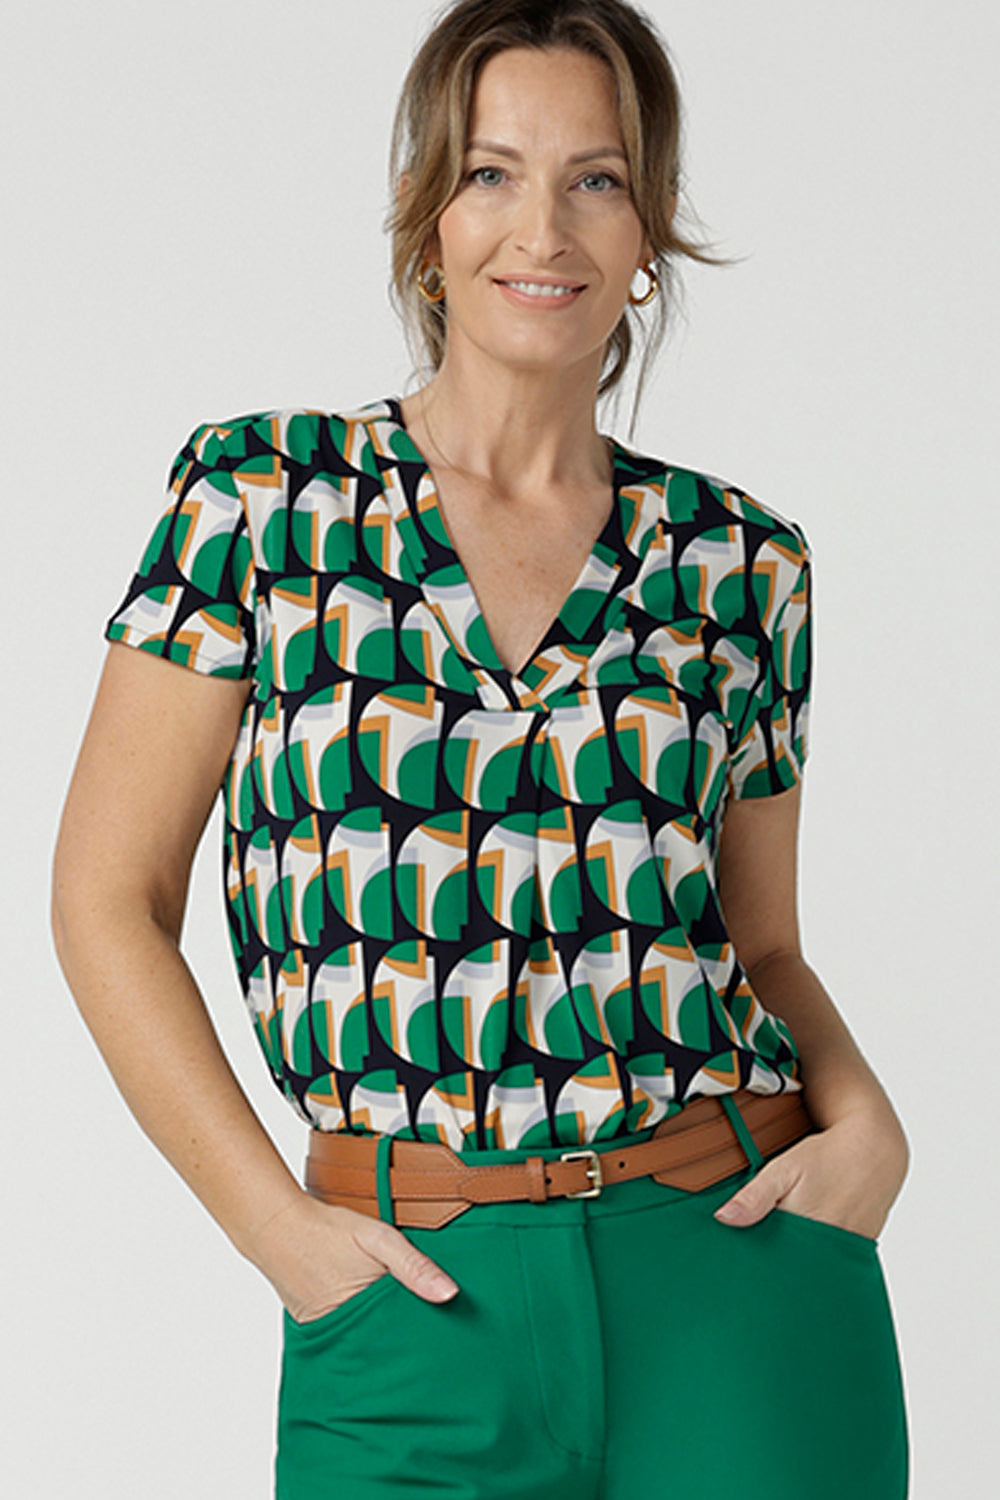 A size 10 woman wears a v-neck short sleeve jersey top in a geometric print. She wears the top. Designed and made in Australia for petite to plus size women.